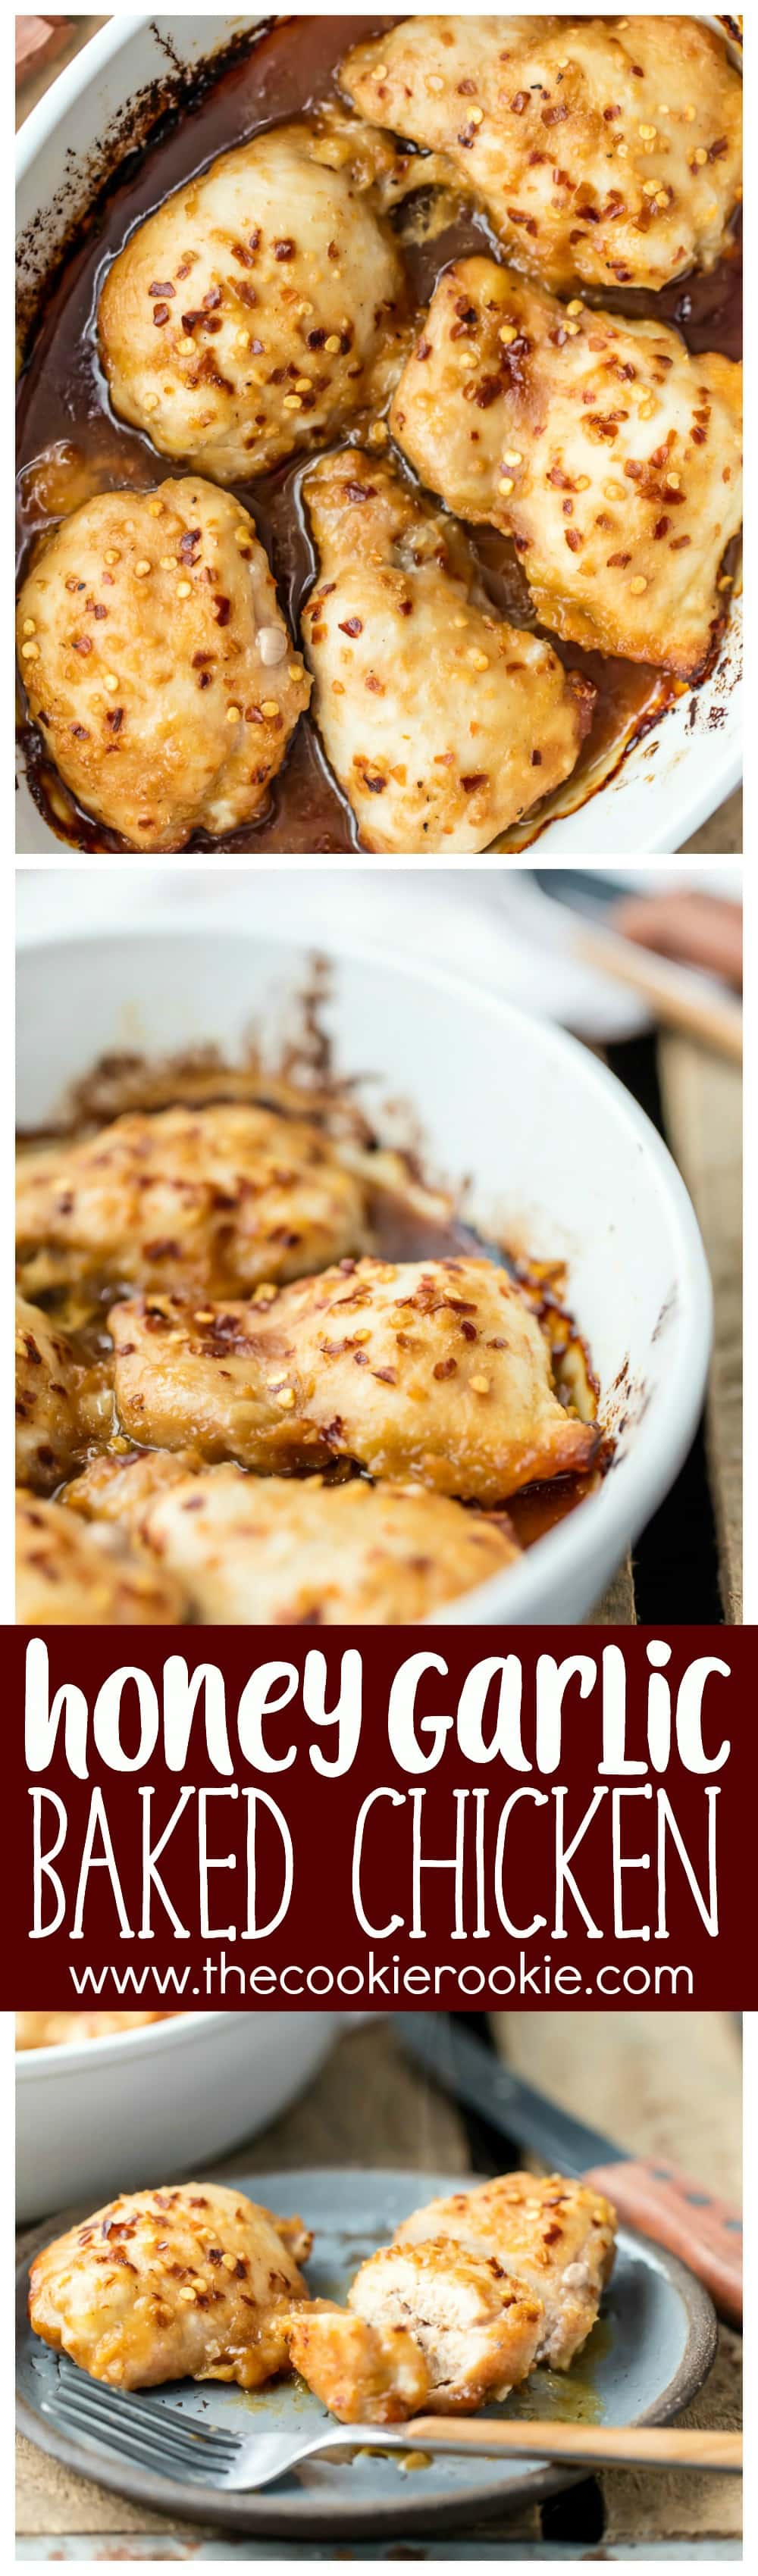 Easy Honey Garlic Baked Chicken The Cookie Rookie inside honey baked chicken recipe with regard to Really encourage